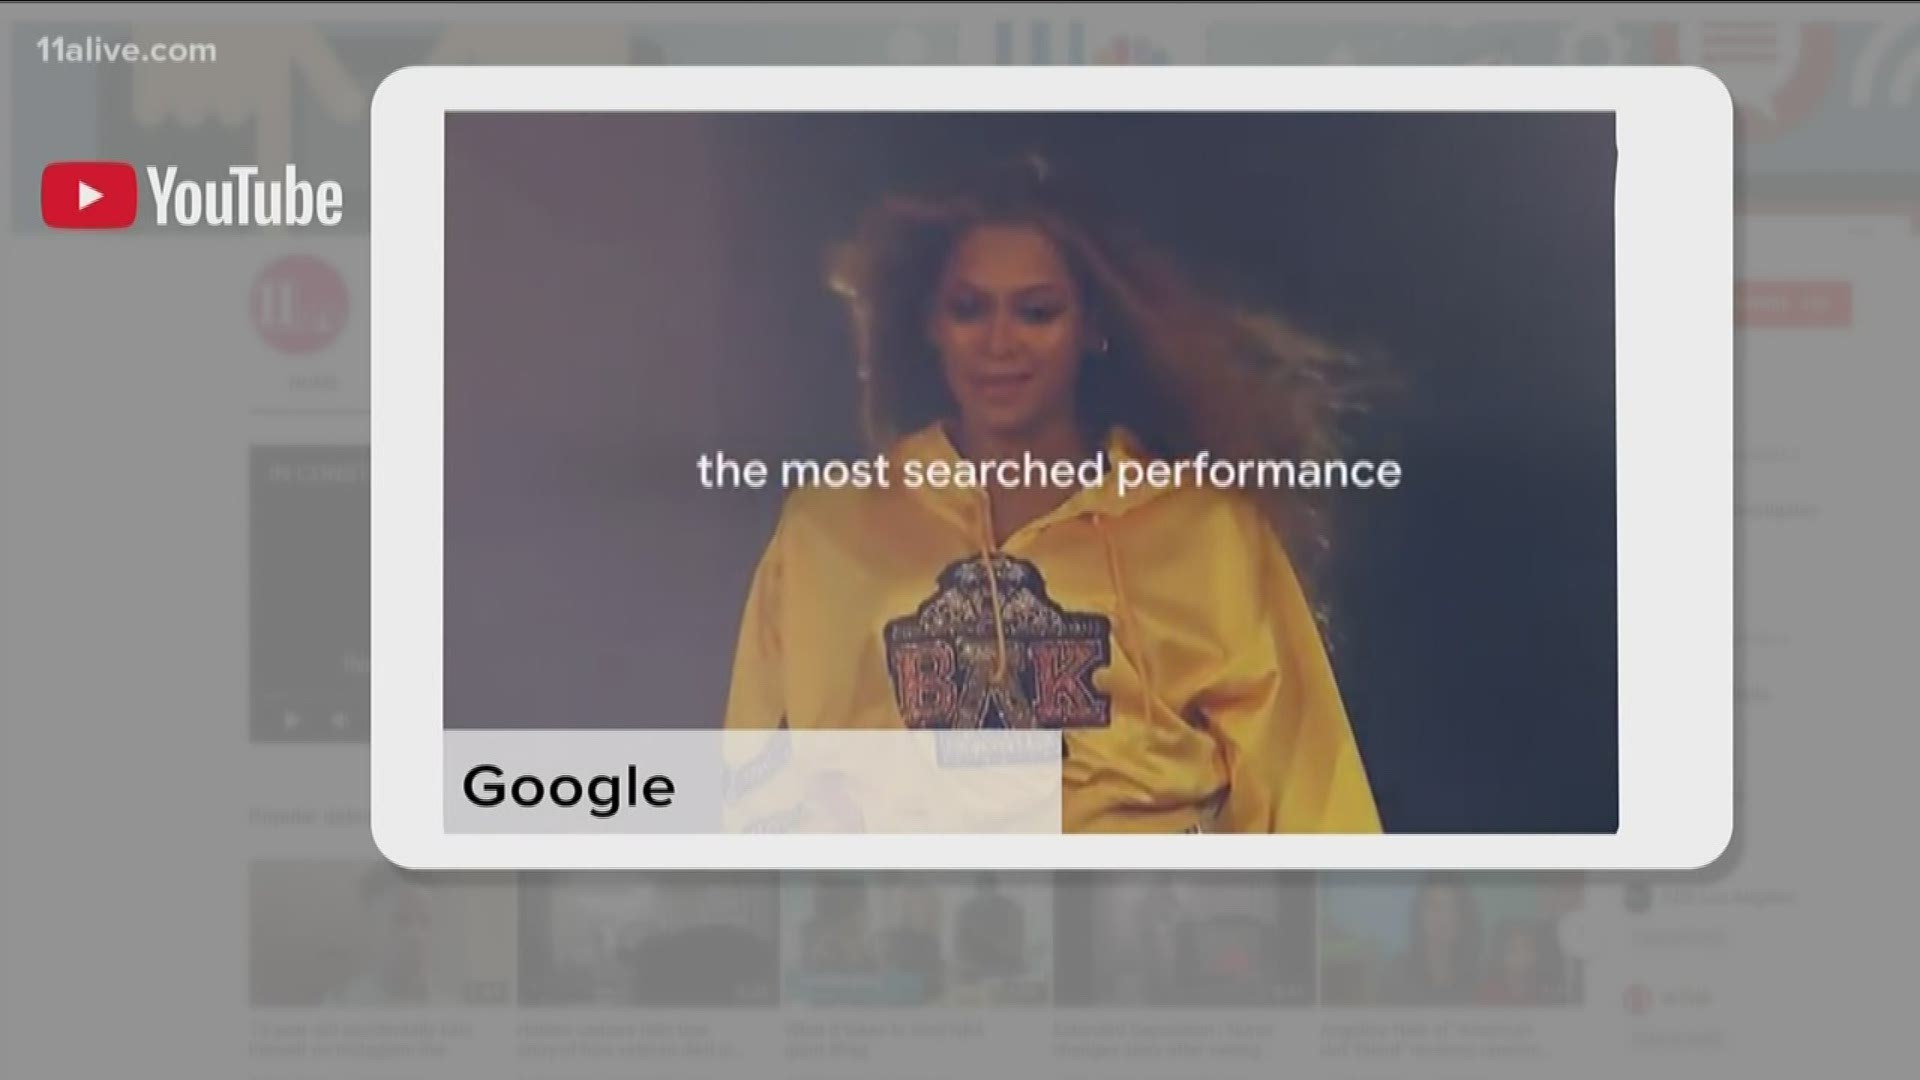 Google found a huge African-American influence when it crunched the data to see who and what topped the U.S. list of several 'most searched' topics.